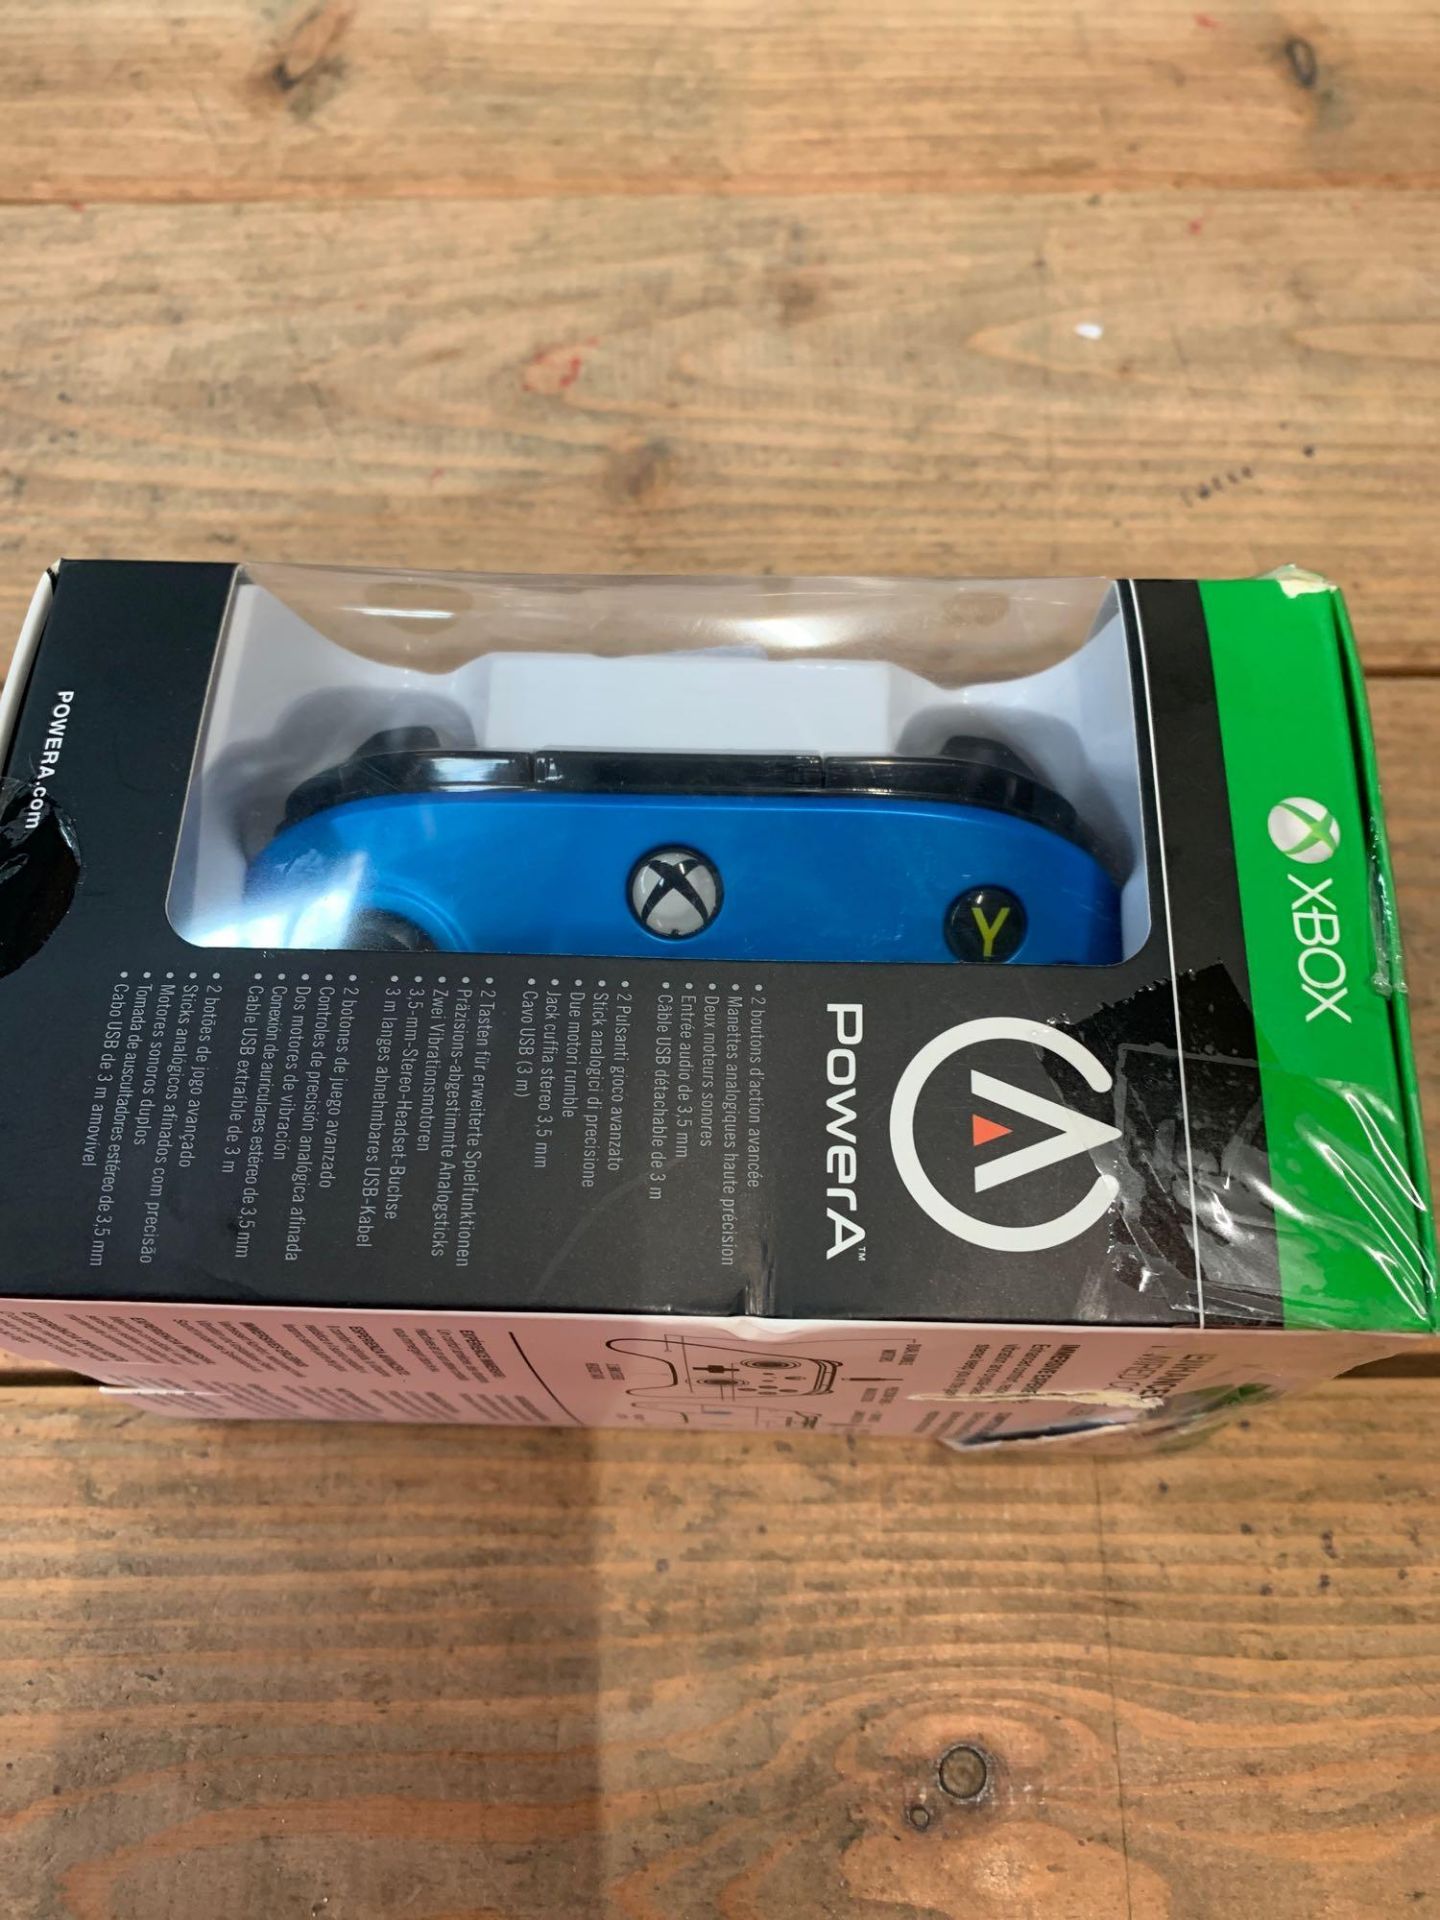 1 LOT TO CONTAIN 1 POWER A XBOX ONE REPLICA PAD (THIS ITEM IS AN UNTESTED CUSTOMER RETURN. PUBLIC